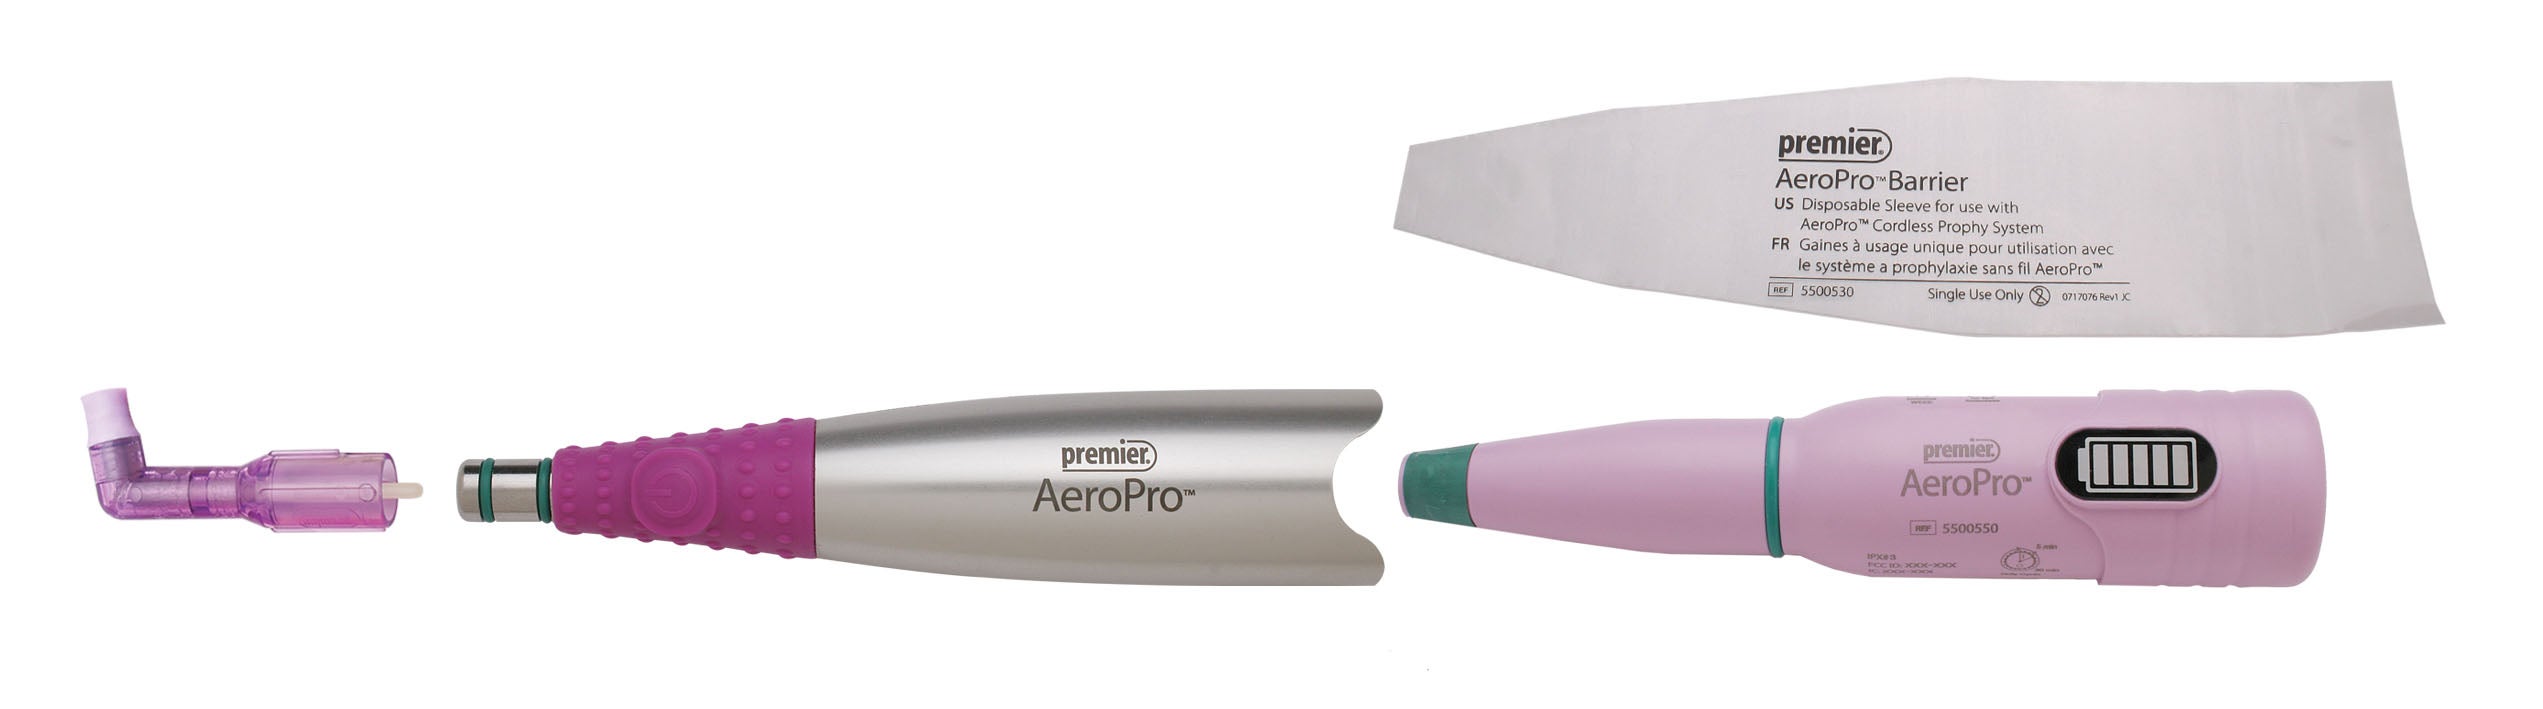 Components of the AeroPro™ Cordless Prophy Handpiece System